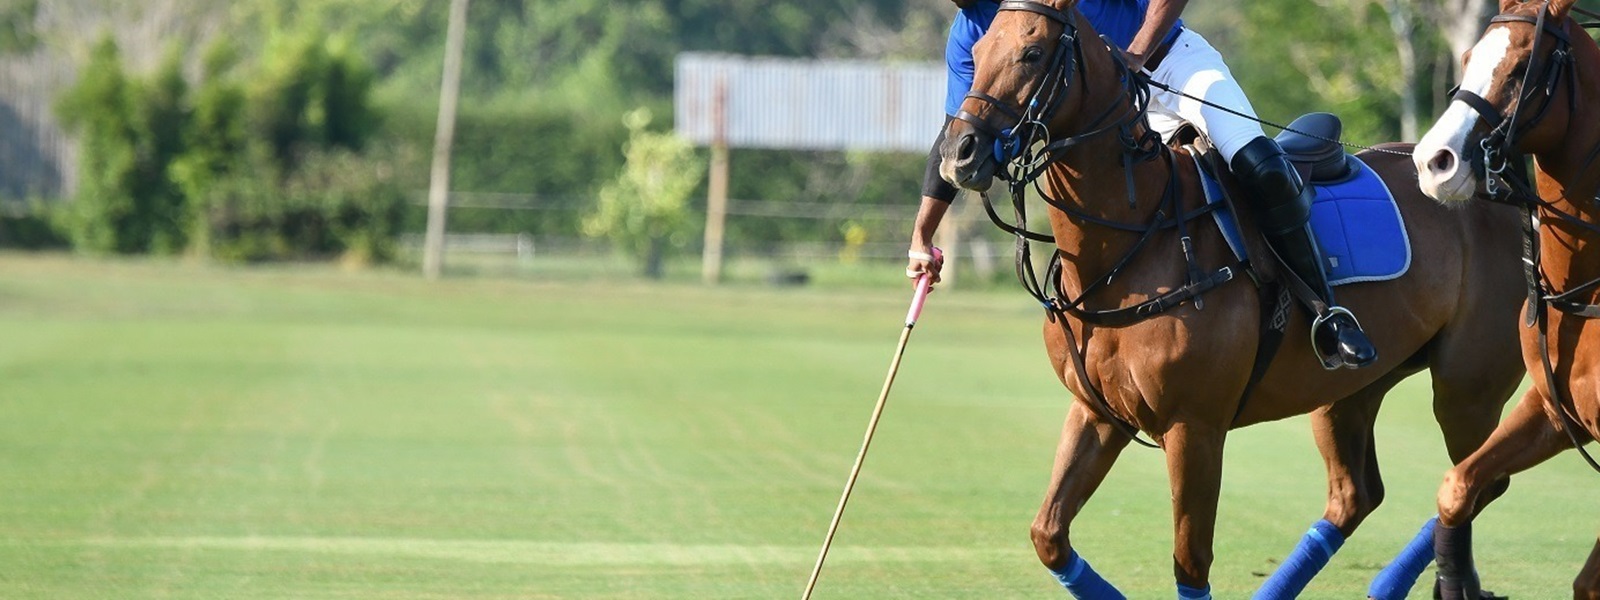 Players vie for the ball during a horse polo match